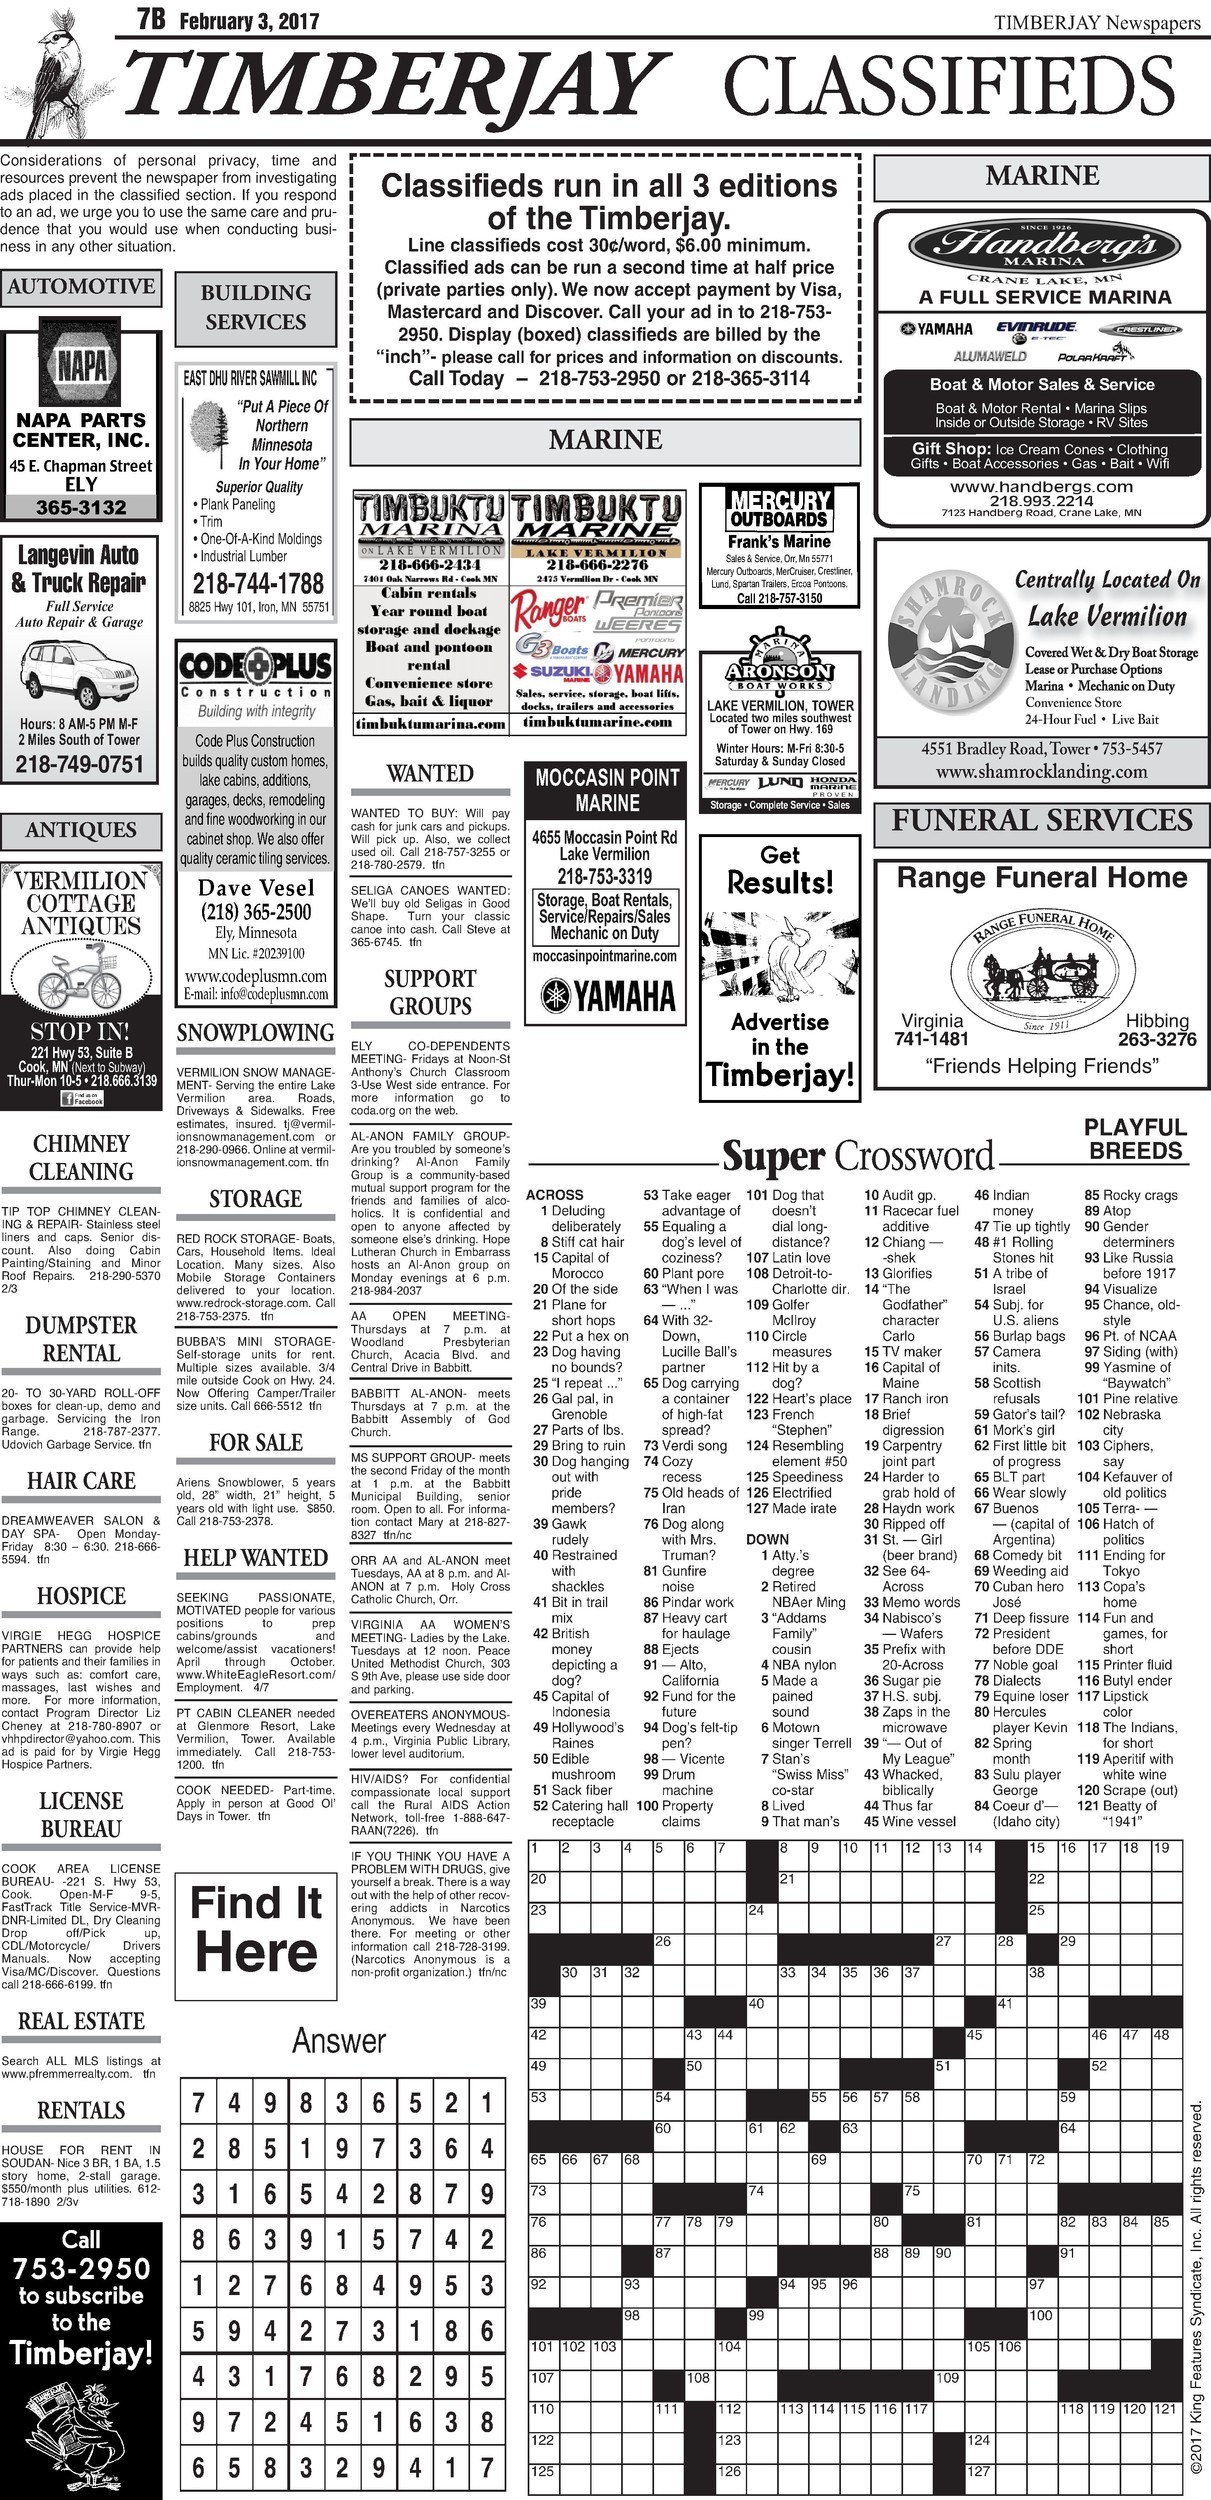 Click here to view the legal notices and classifieds on page 7B